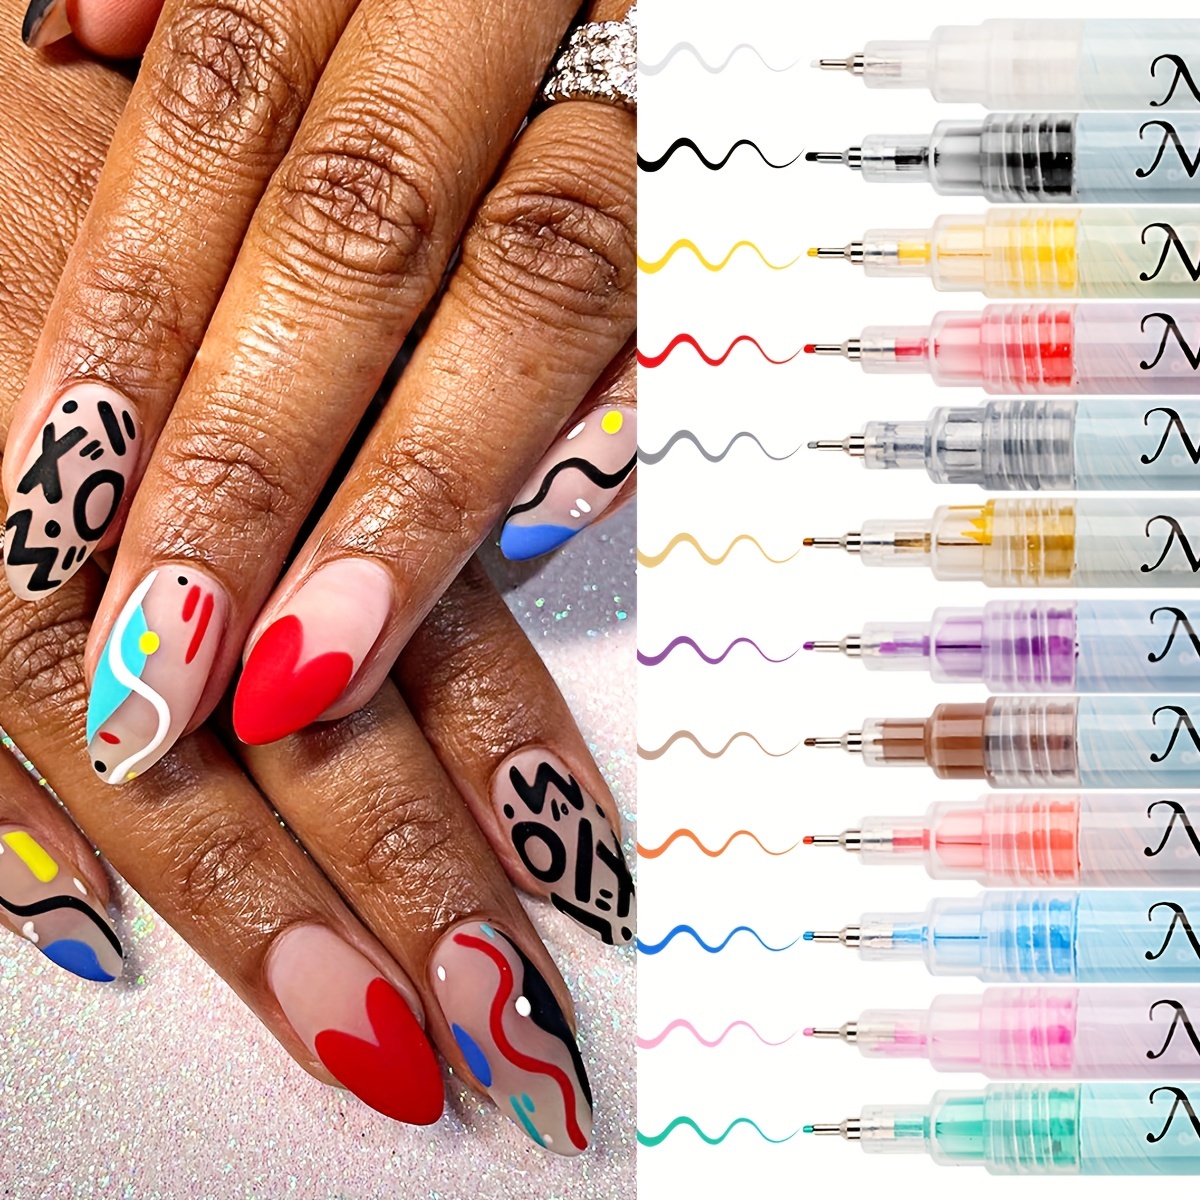 Buy Store2508 Nail Art Combo, Nail Art Pen Set of 5,15pc Nail Brush Set,10  pc Stripping Roll Tape and A French Manicure Nail Art Tip Sticker. Online  at Lowest Price Ever in